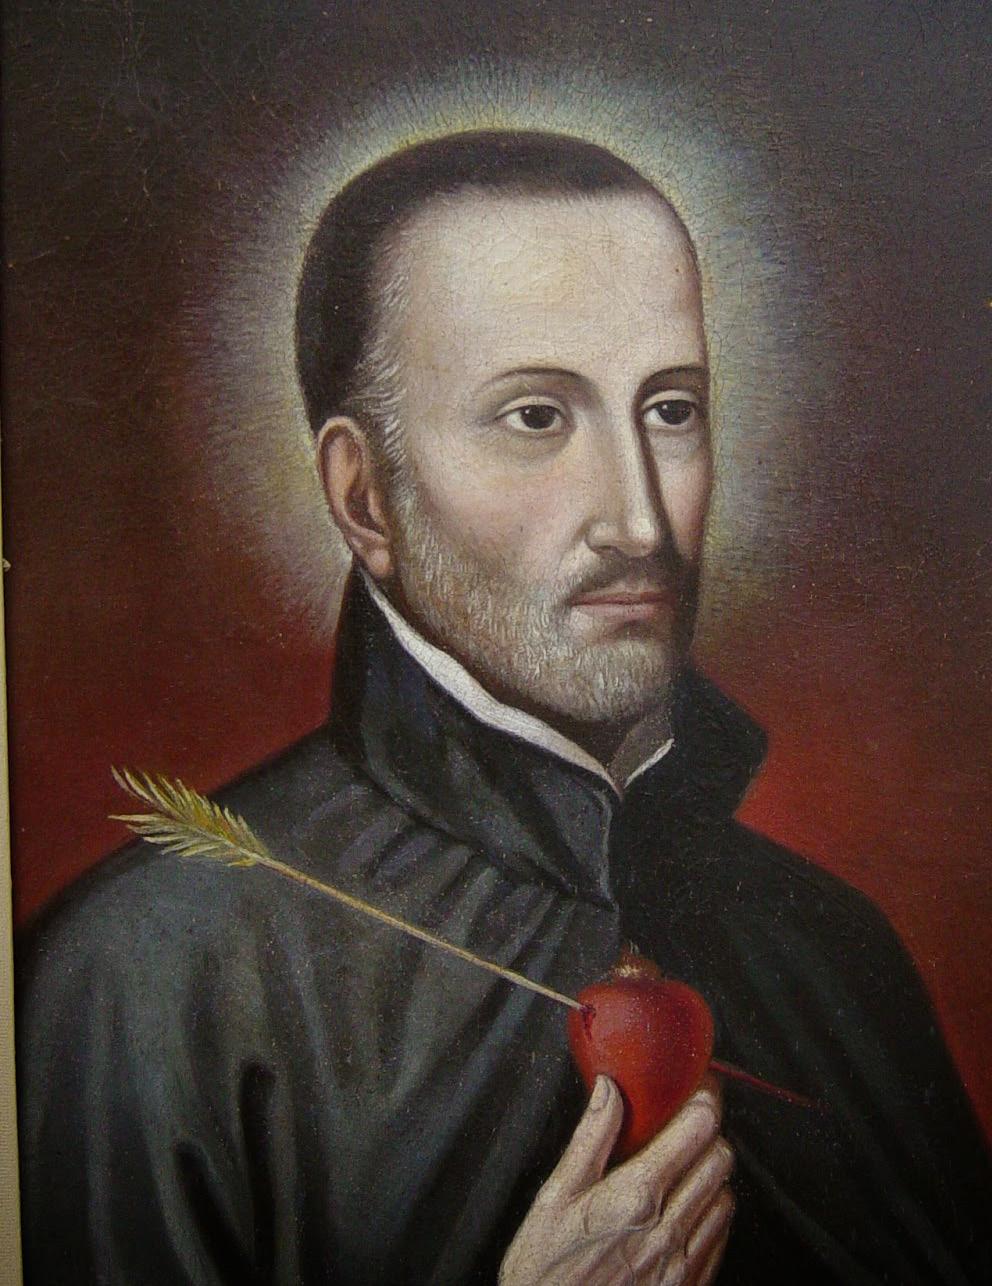 STEWARDSHIP SAINT for November In 1609, attracted to the evangelizing activities of the Jesuits, Father Roque entered the order and began his own evangelizing ministry as a missionary in a vast